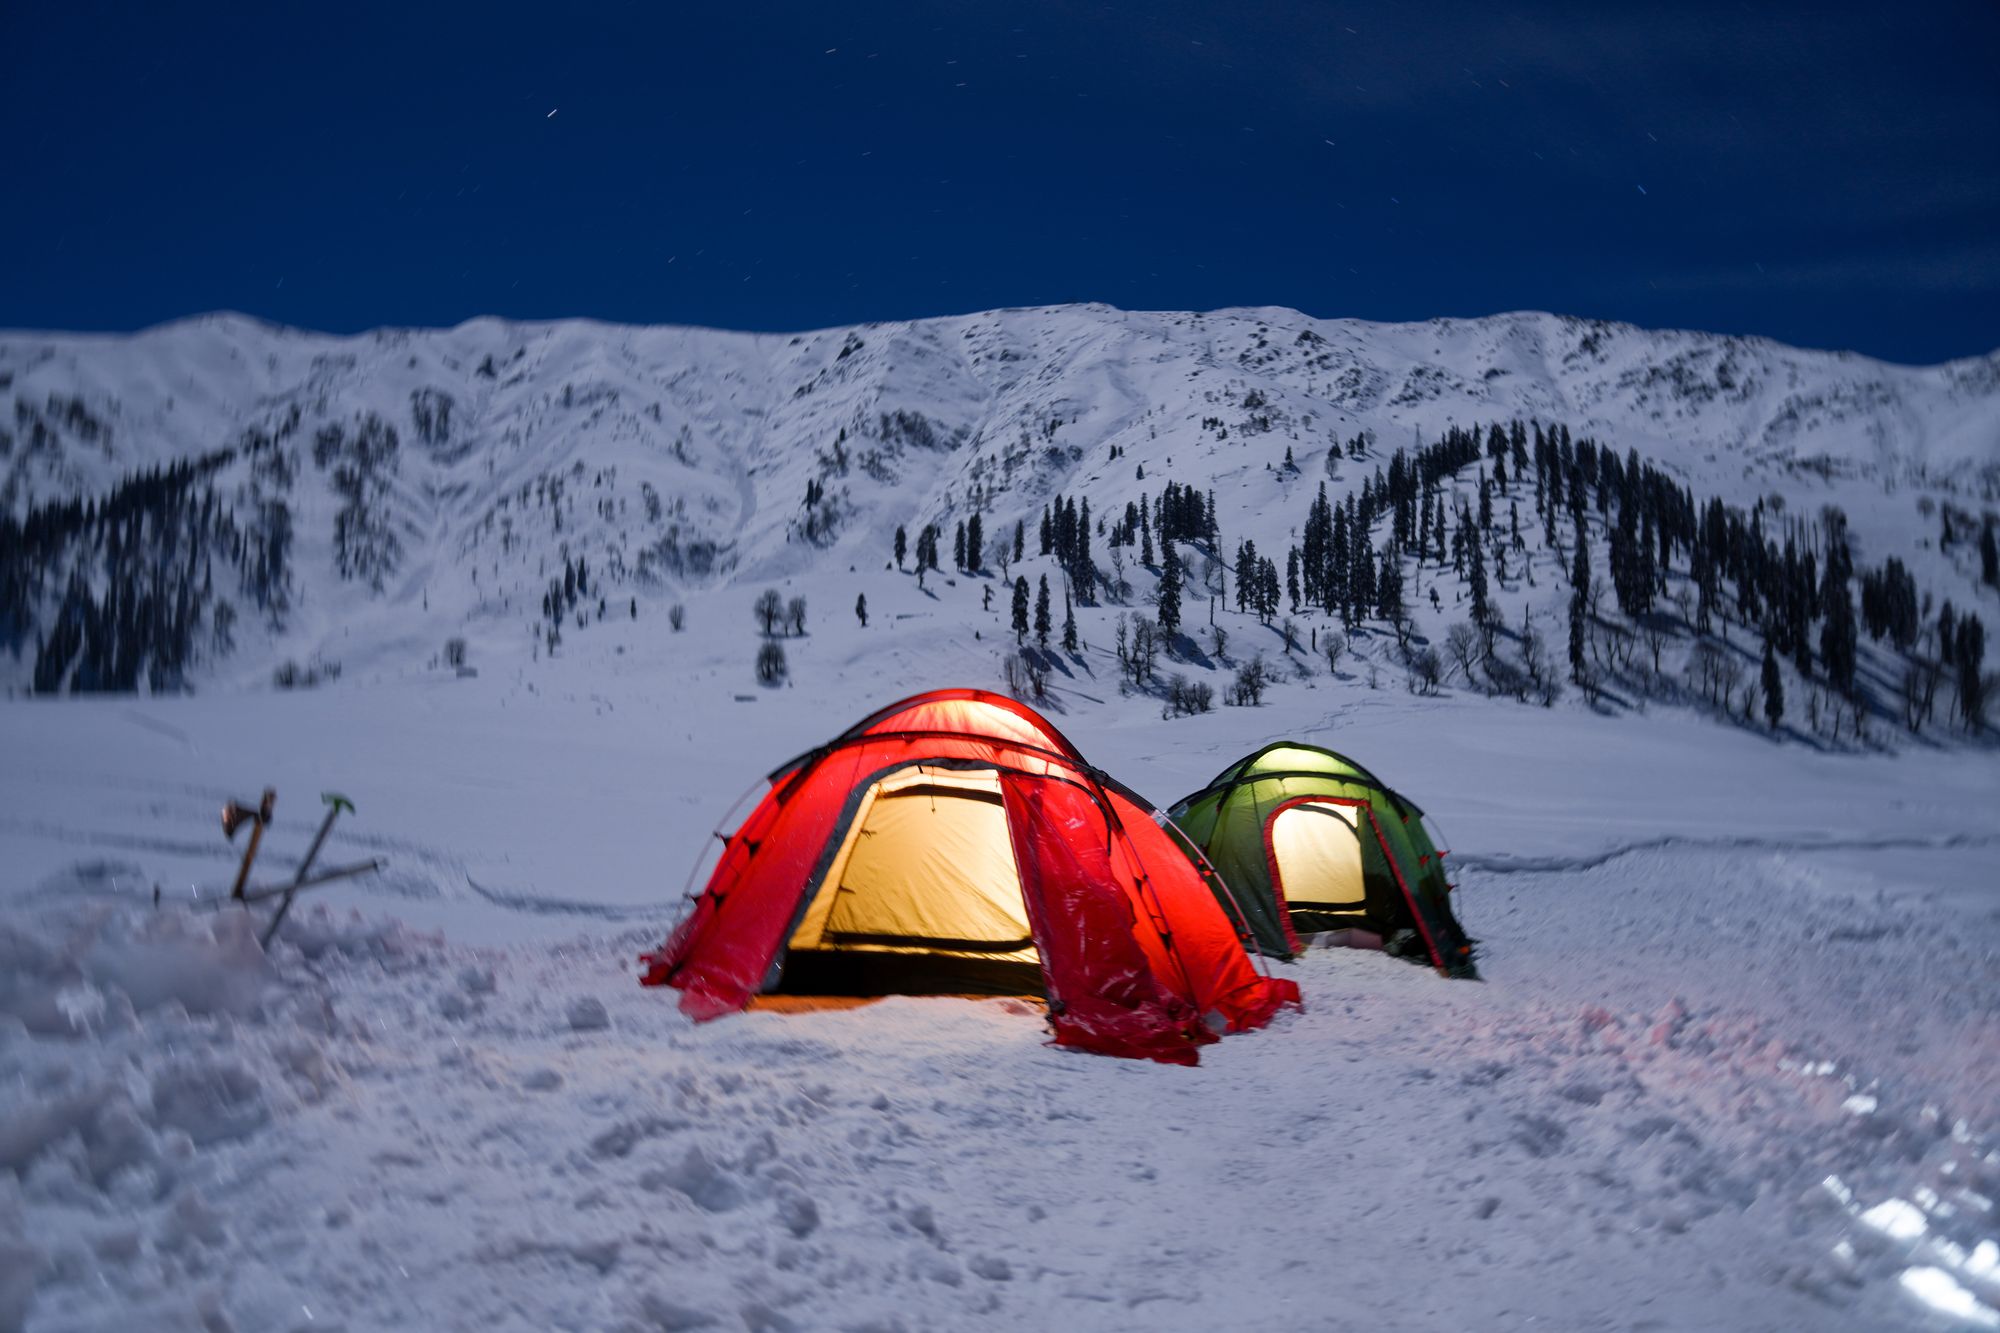 Winter Camping. Tent pictures in Mountain Winter. Leave the camp